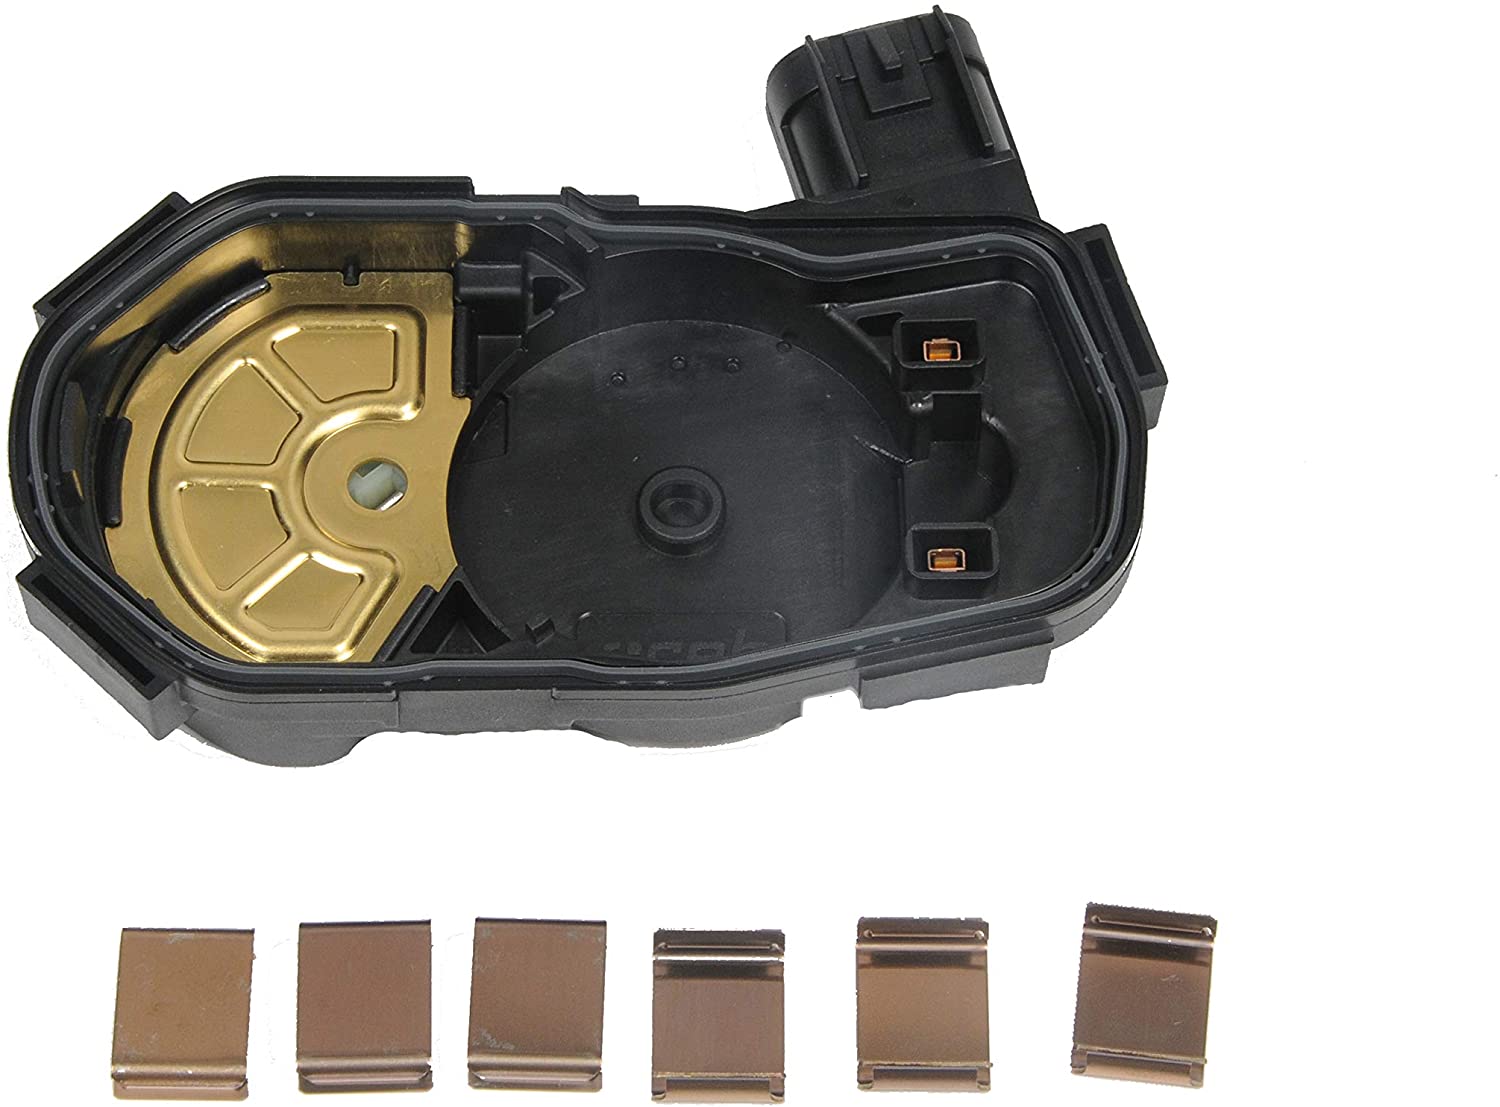 ACDelco 19300180 GM Original Equipment Throttle Position Sensor Kit with Clips and Cover